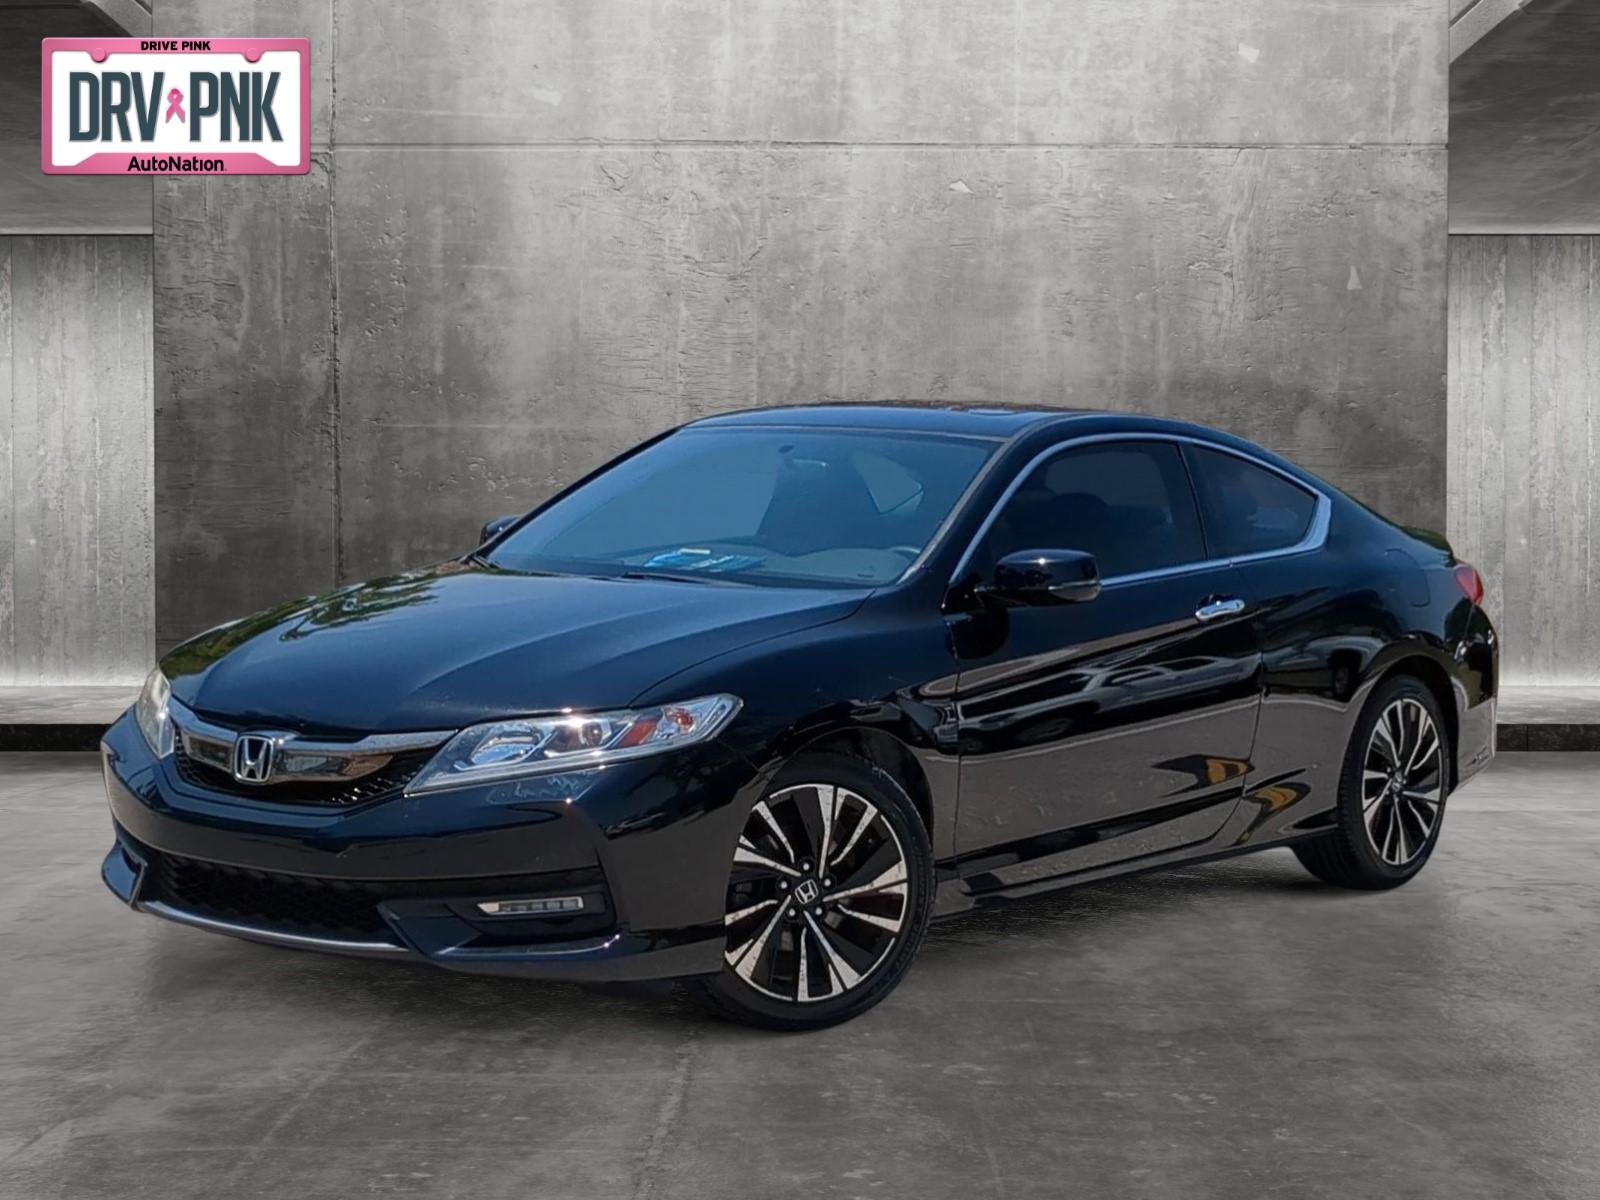 2017 Honda Accord Coupe Vehicle Photo in Ft. Myers, FL 33907